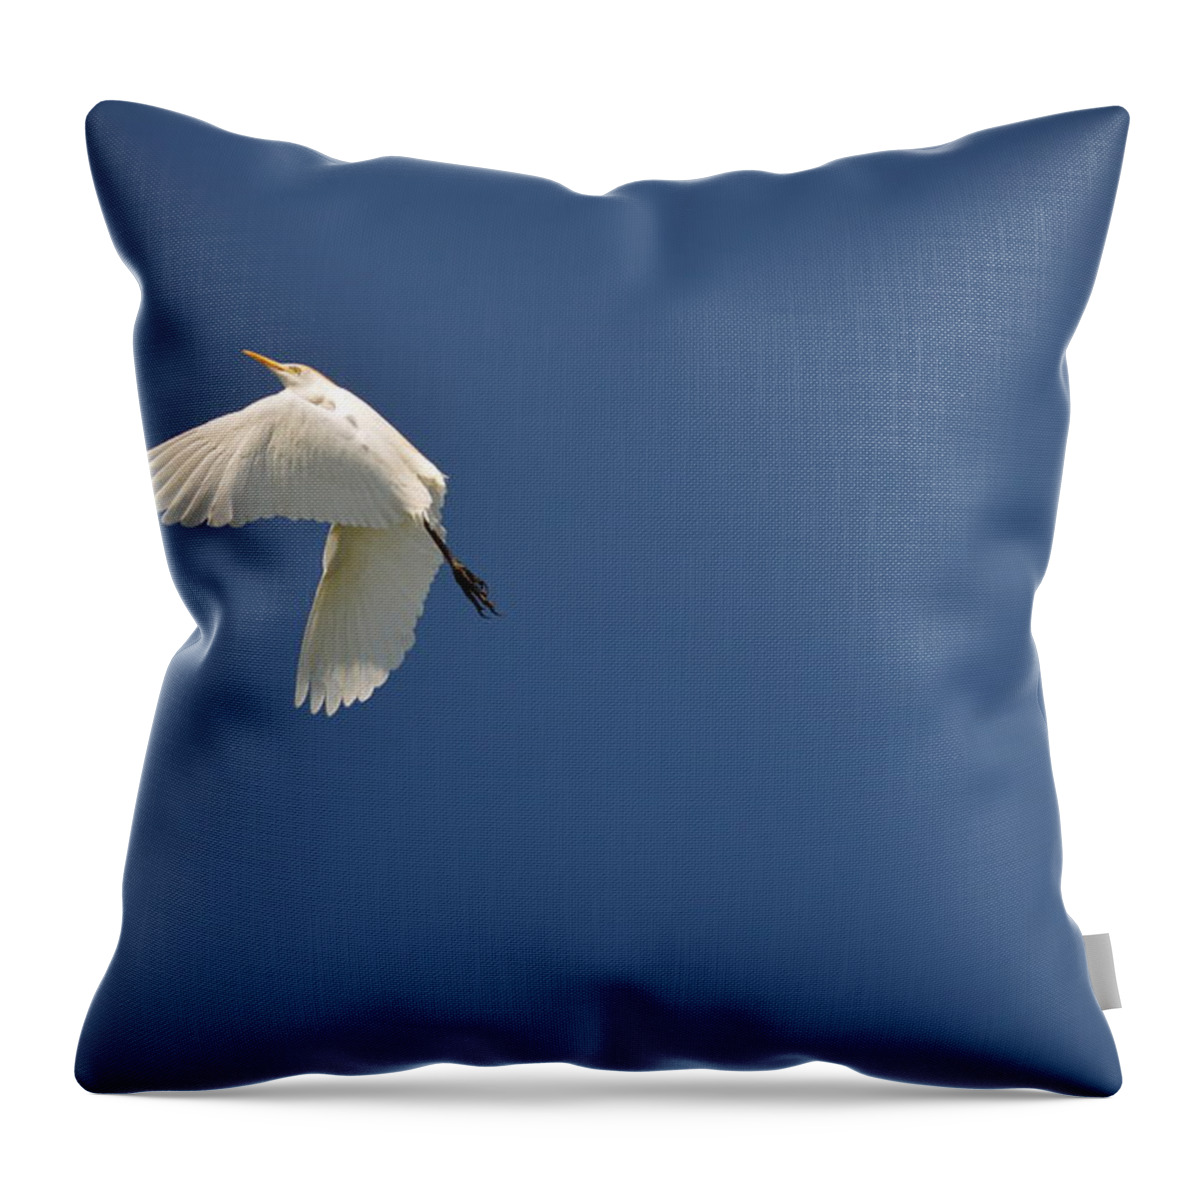 Wildlife Throw Pillow featuring the photograph 5- Cattle Egret by Joseph Keane